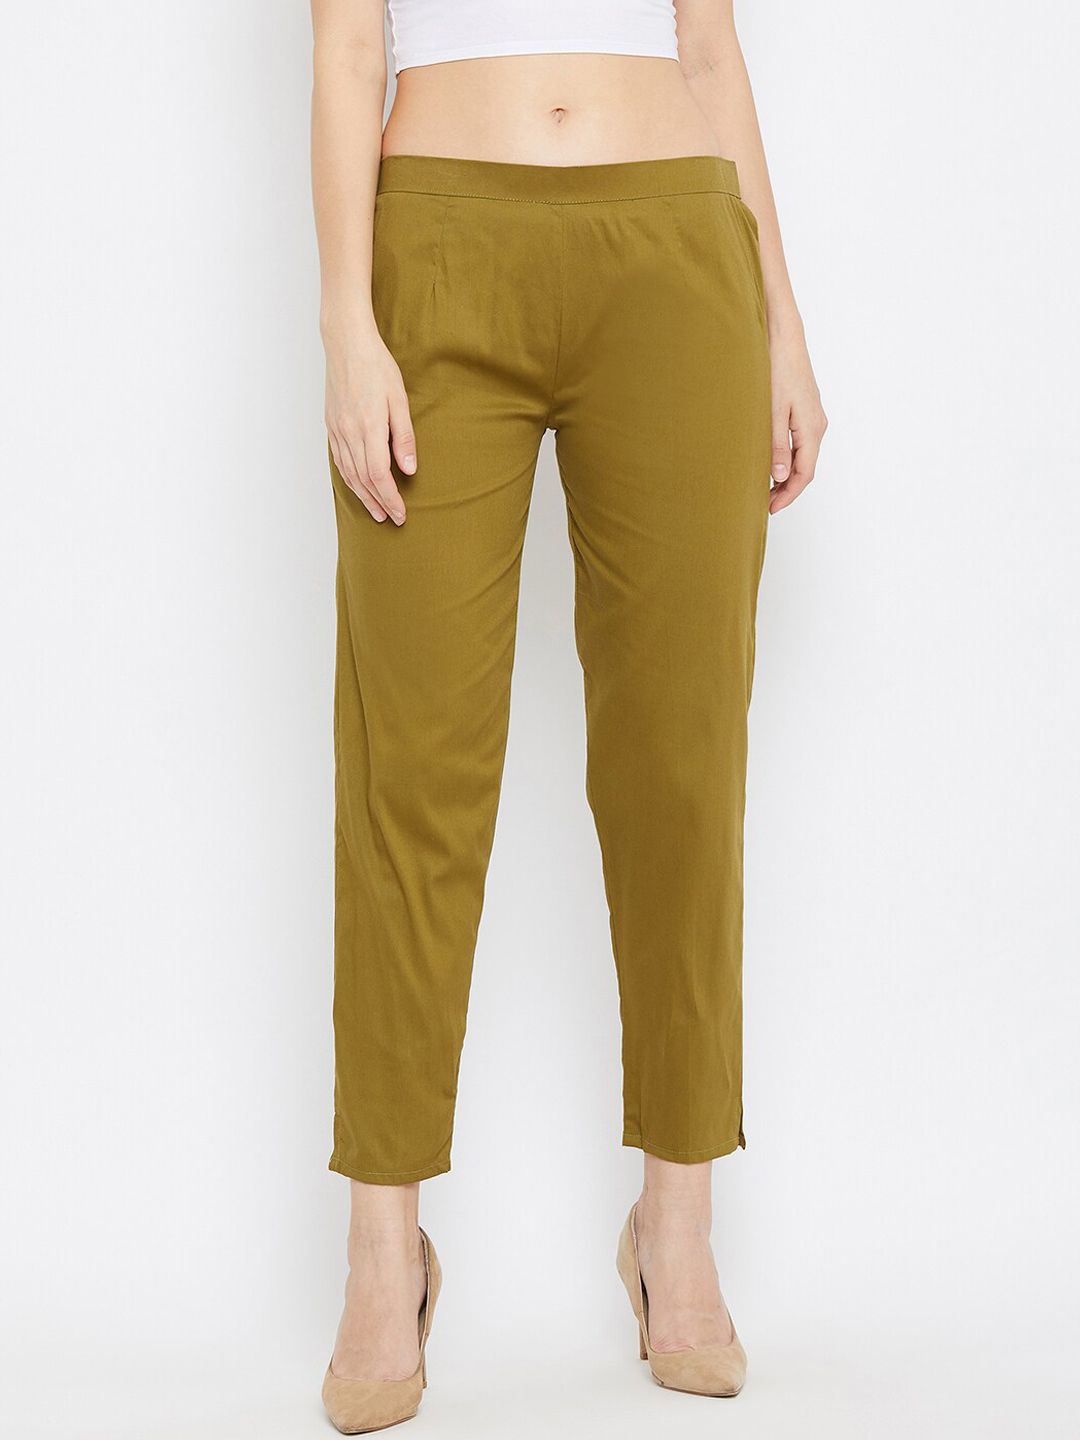 Clora Creation Women Green Trousers Price in India